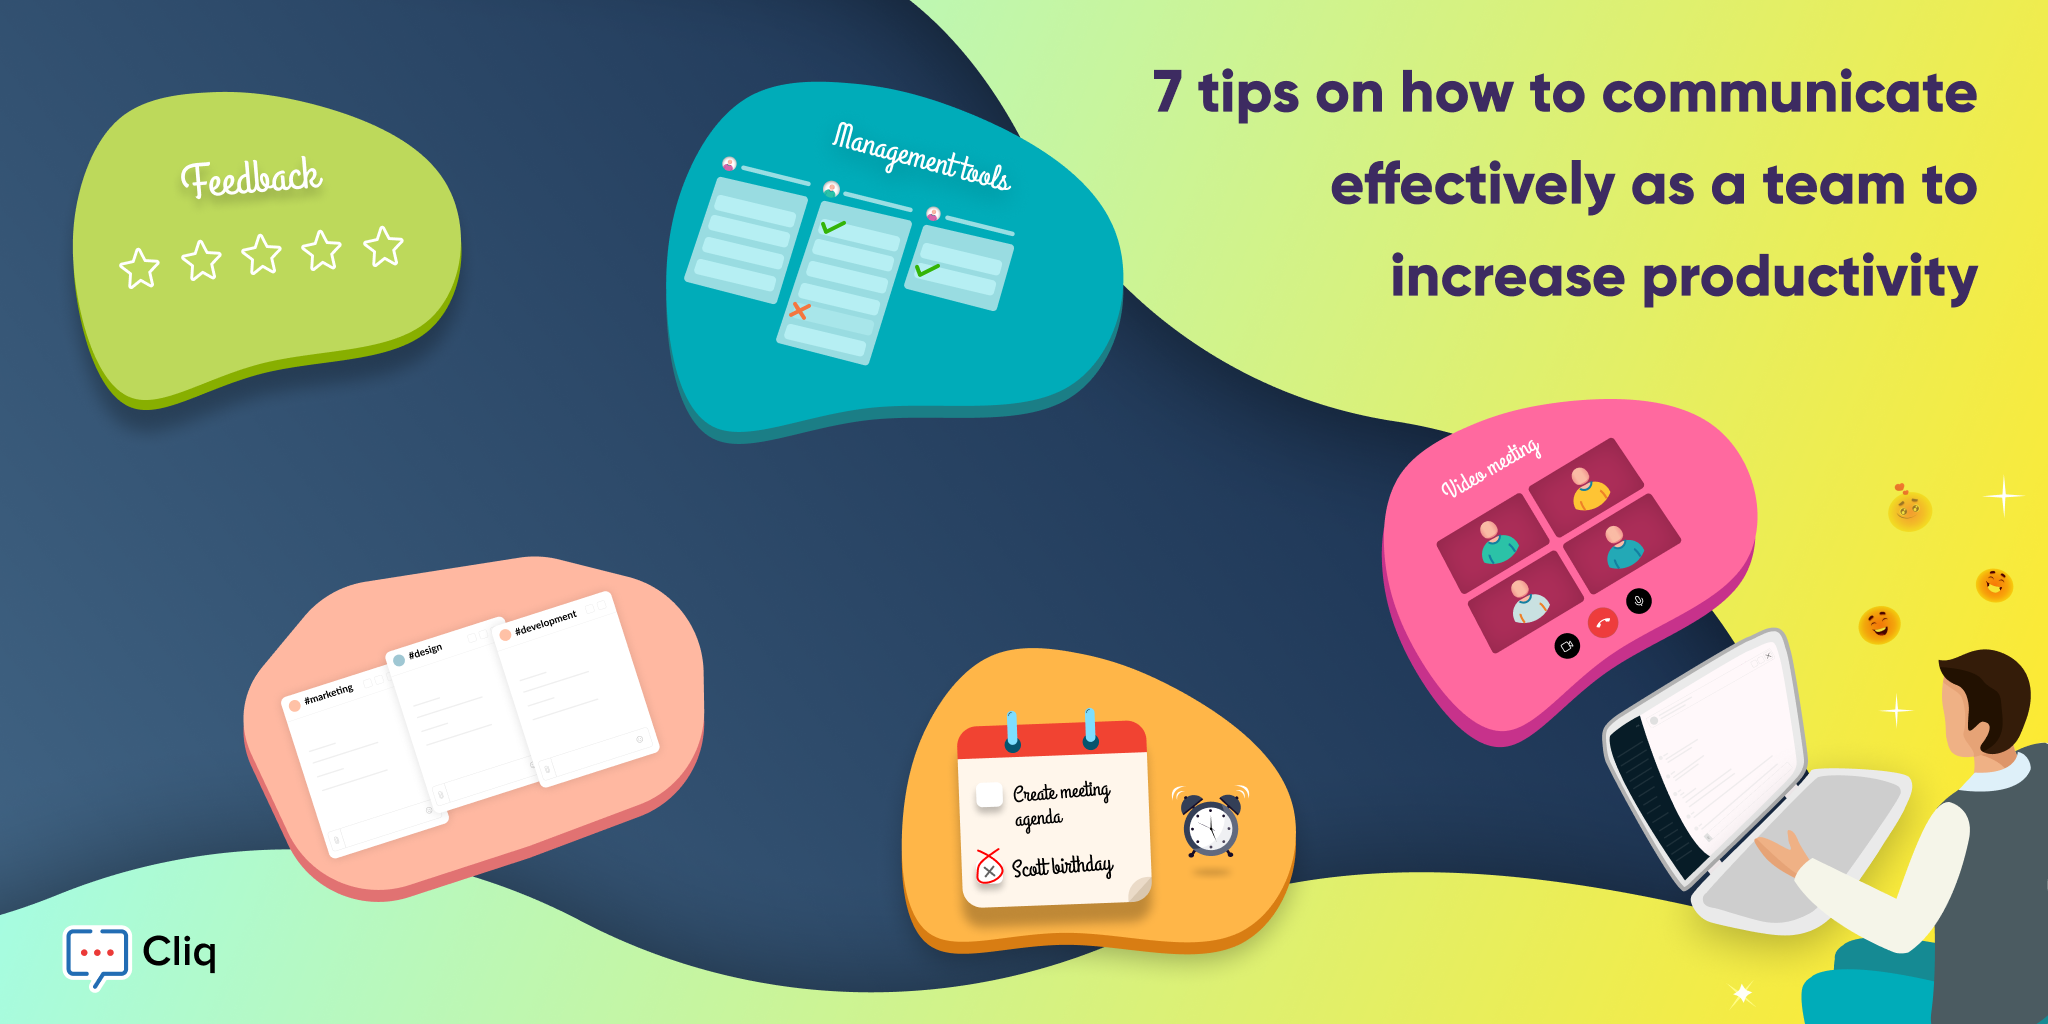 7 tips on how to communicate effectively as a team to increase productivity